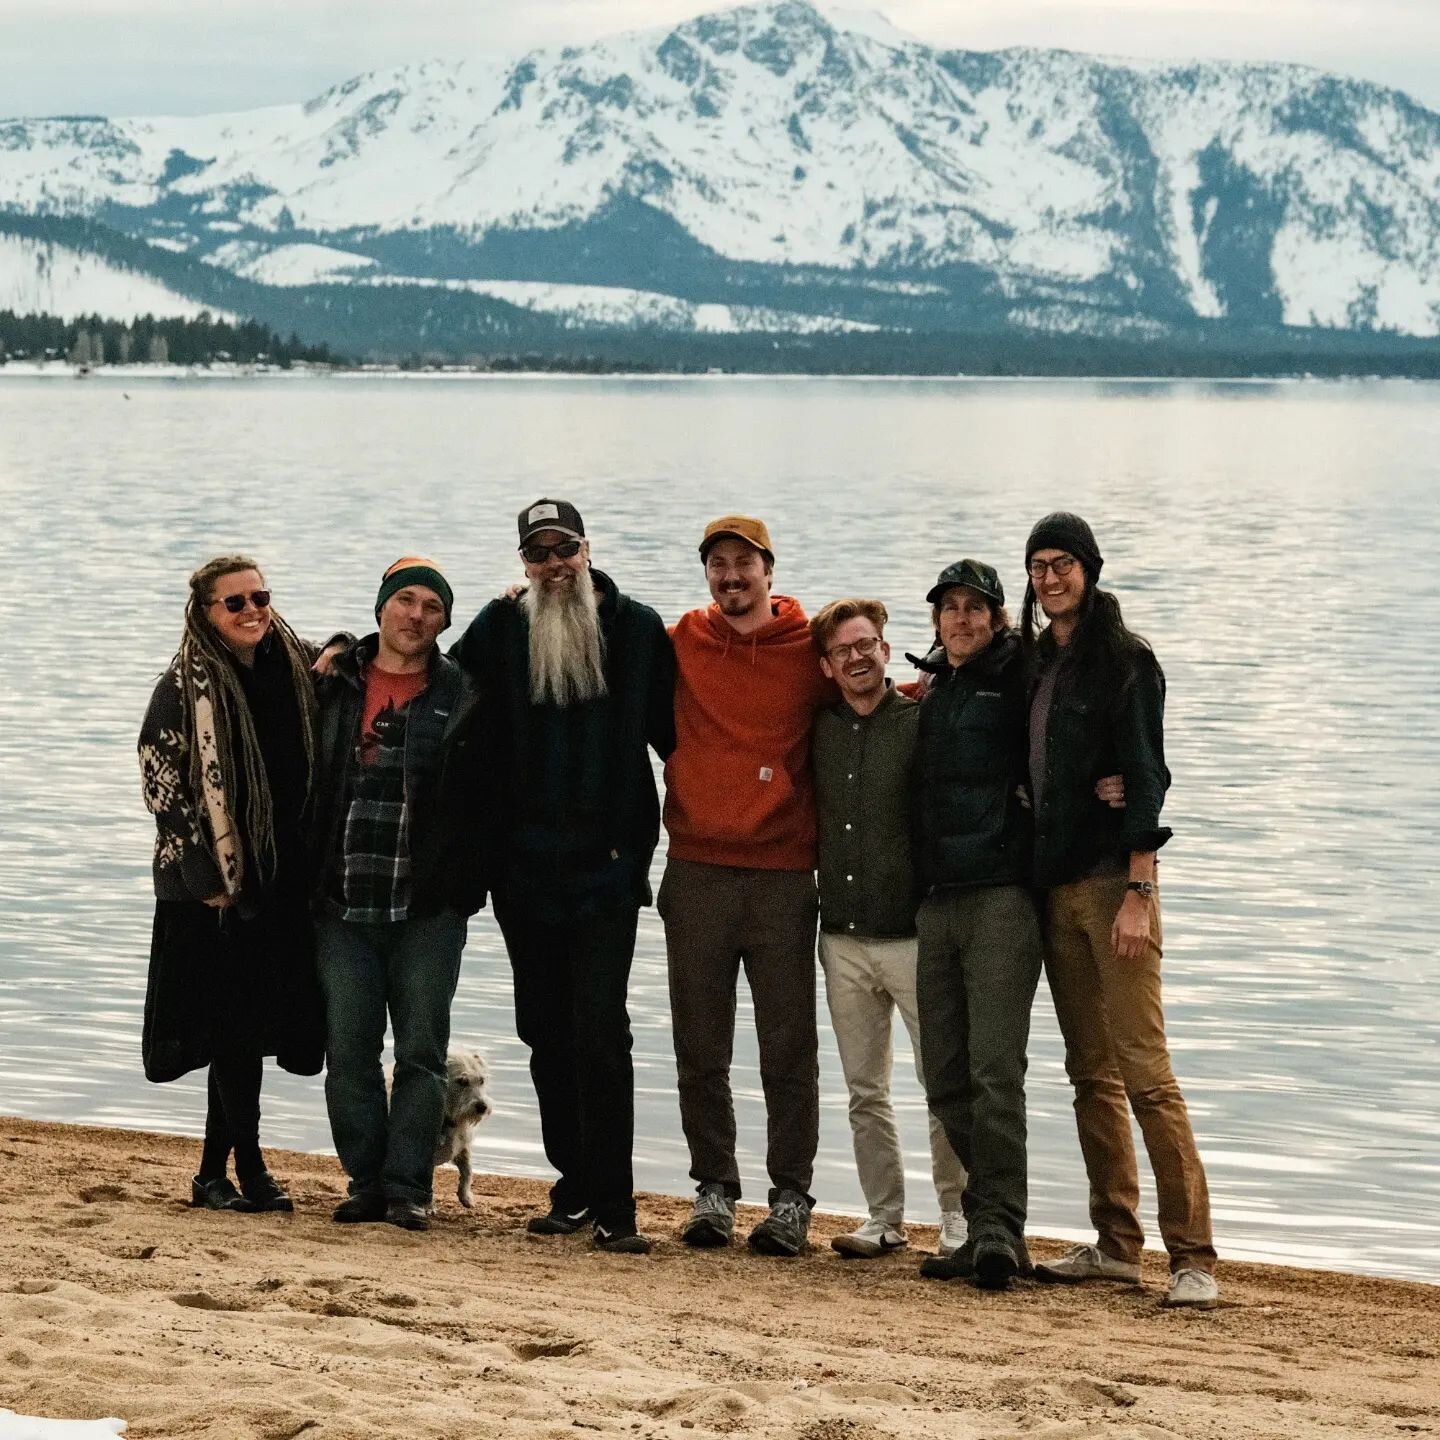 Grateful for all my van fam, pictured and not. I don't know how I got here; owning my own shop, having a friend group better than I could ask, and being able to travel with them to experience all kinds of things, but I'm glad I did. #sunsetdrifters